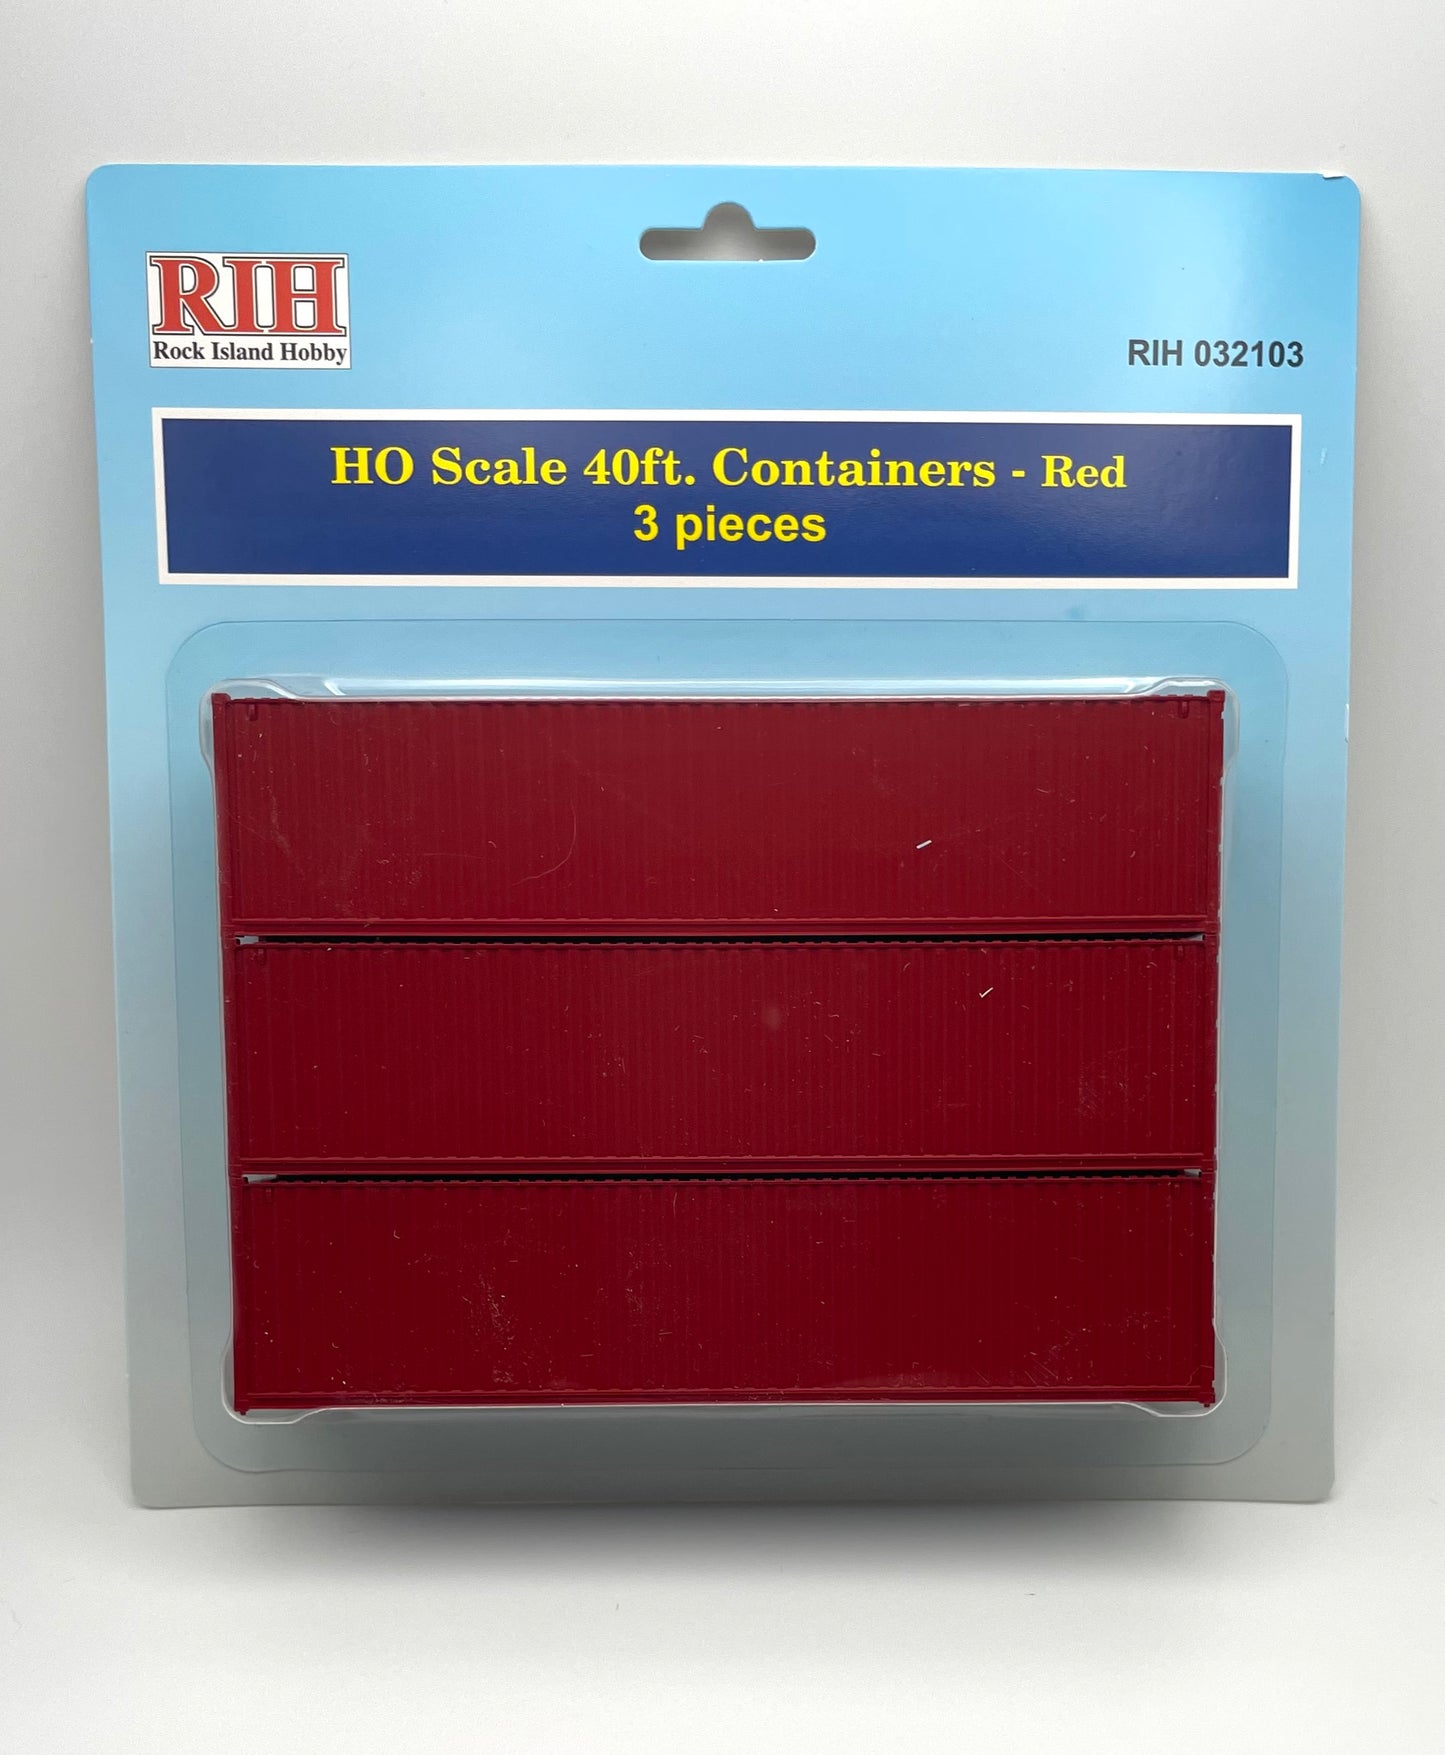 HO Scale 40ft Containers - Red